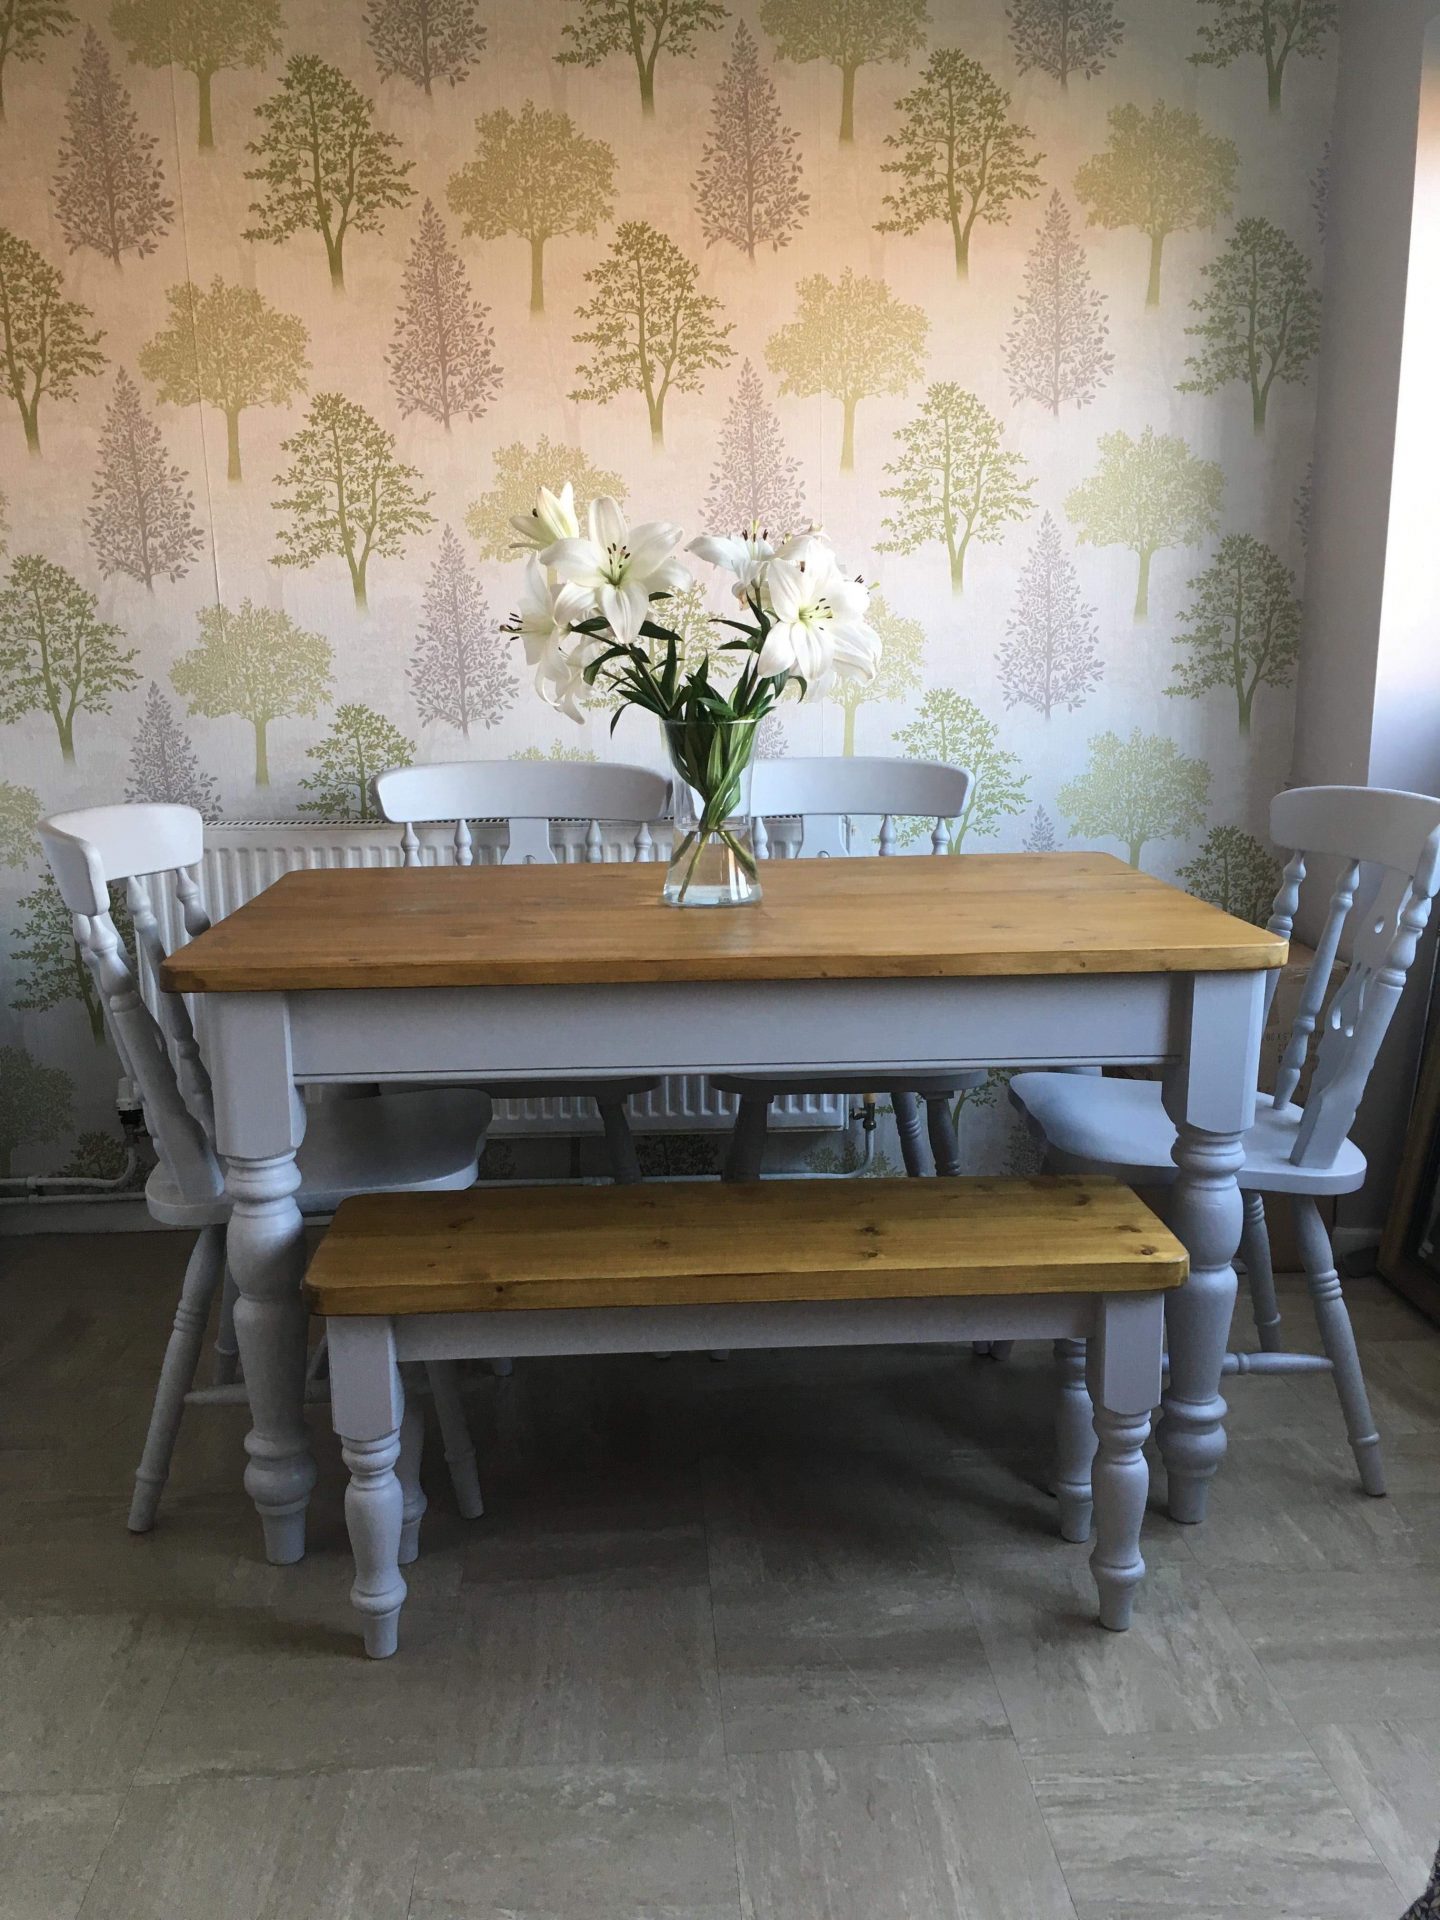 Small grey dining table made from reclaimed wood with bench